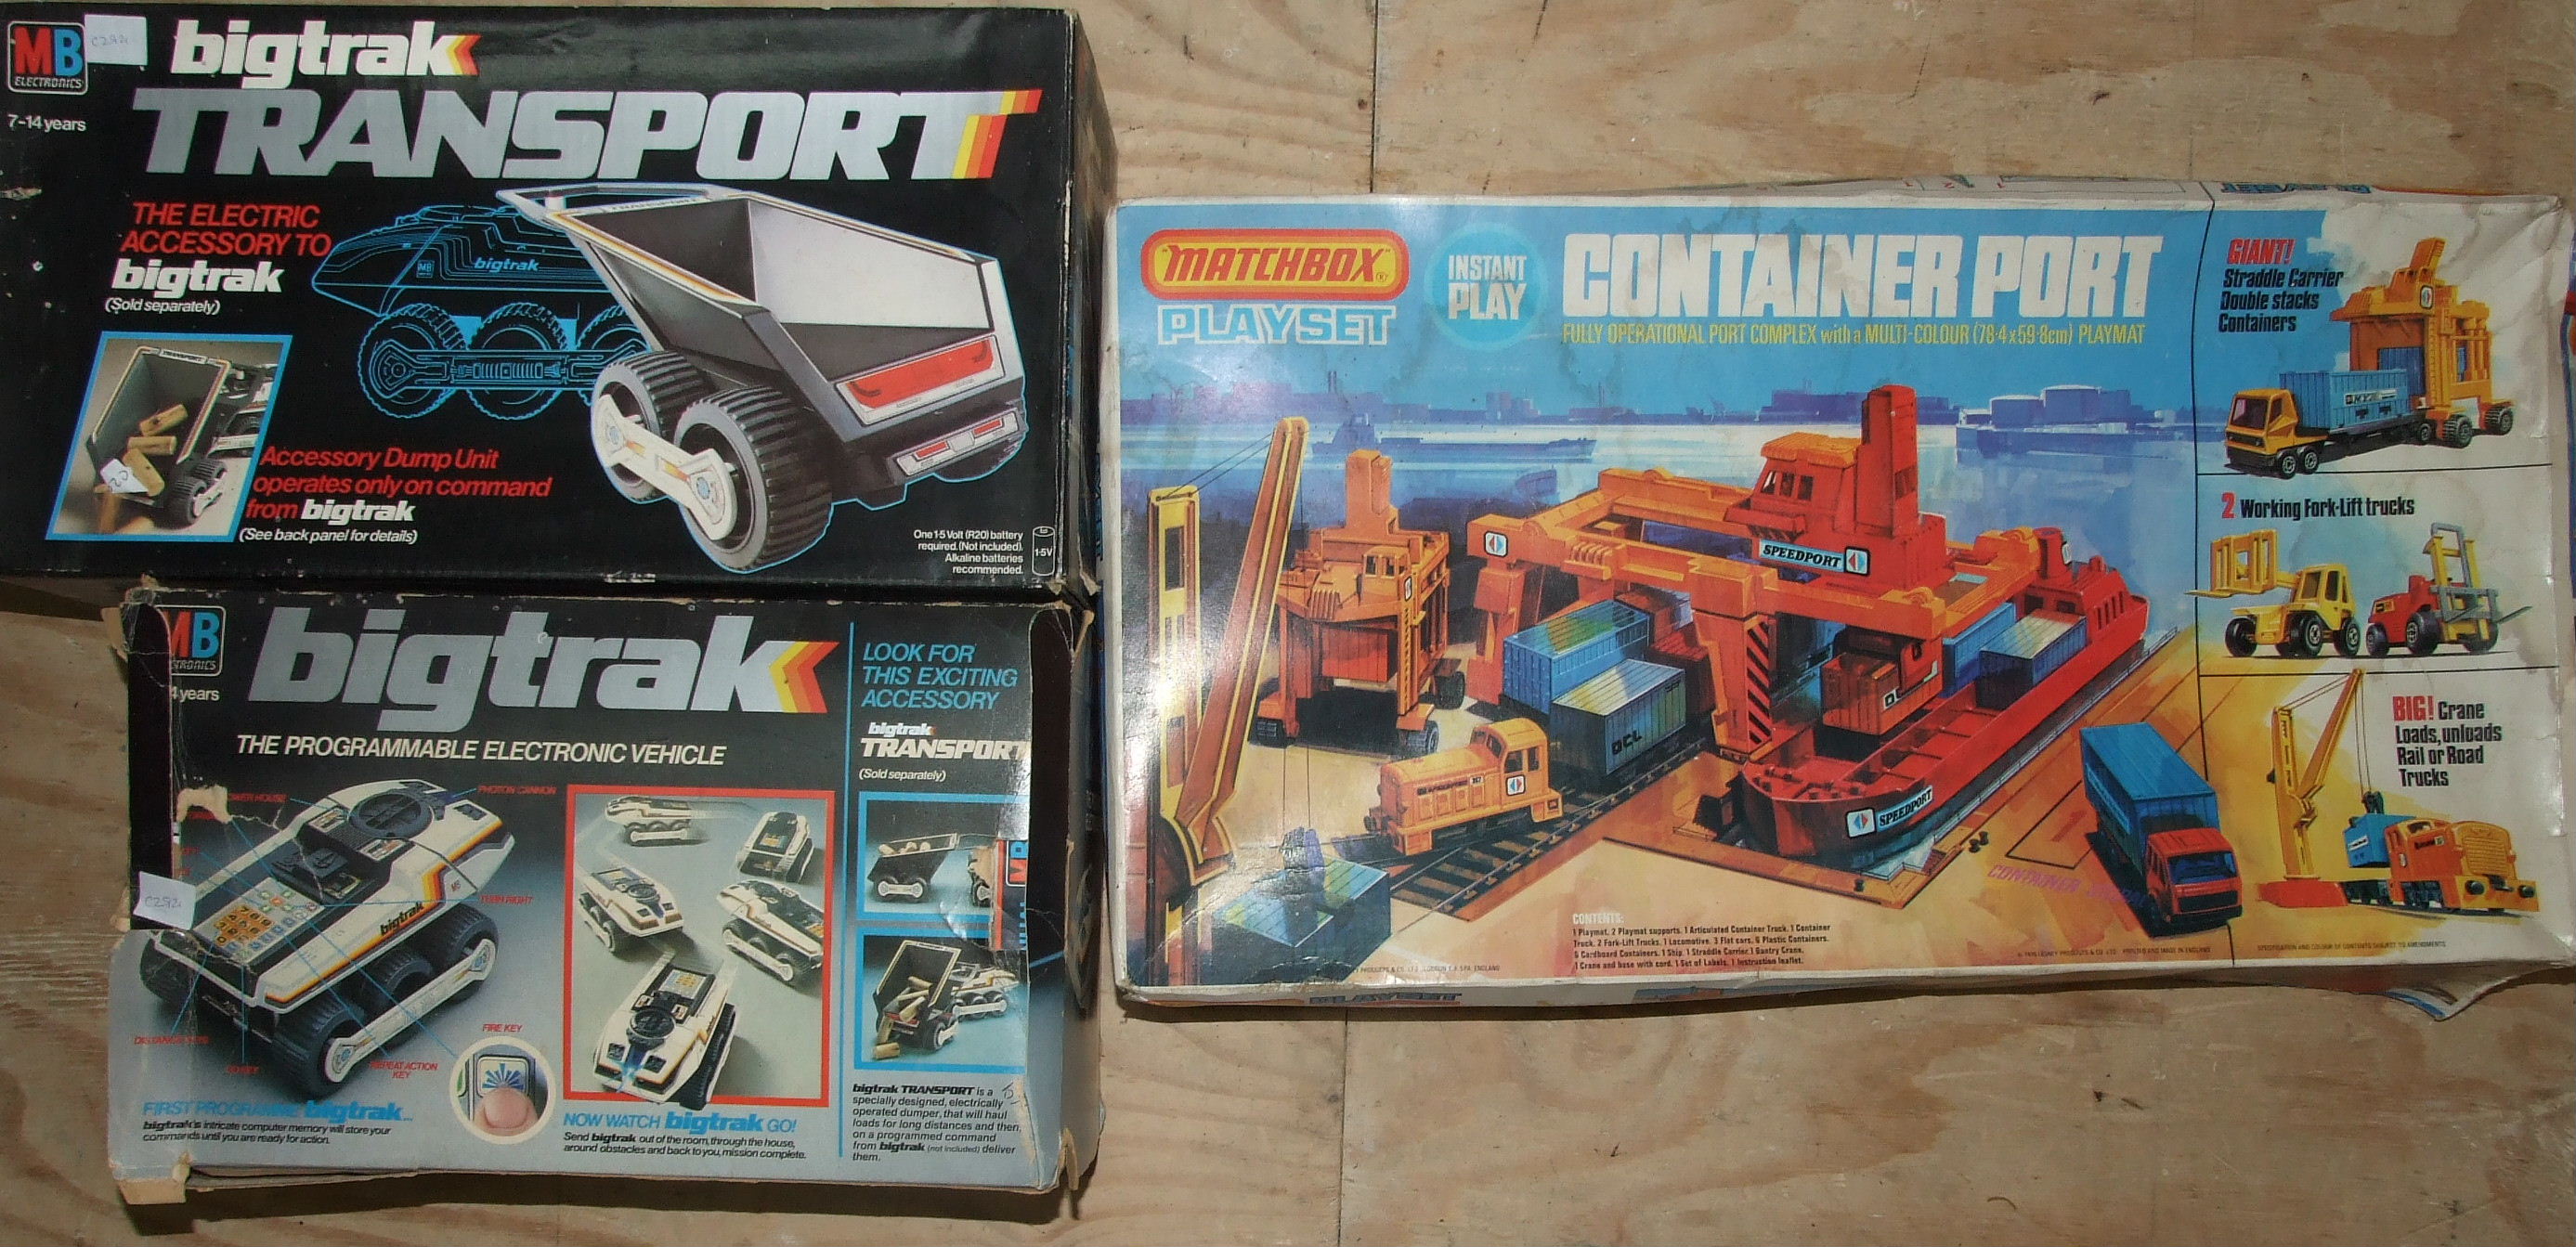 Big Trak Programmable Electronic Vehicle and Big Trak Transport, both boxed and a Matchbox Container